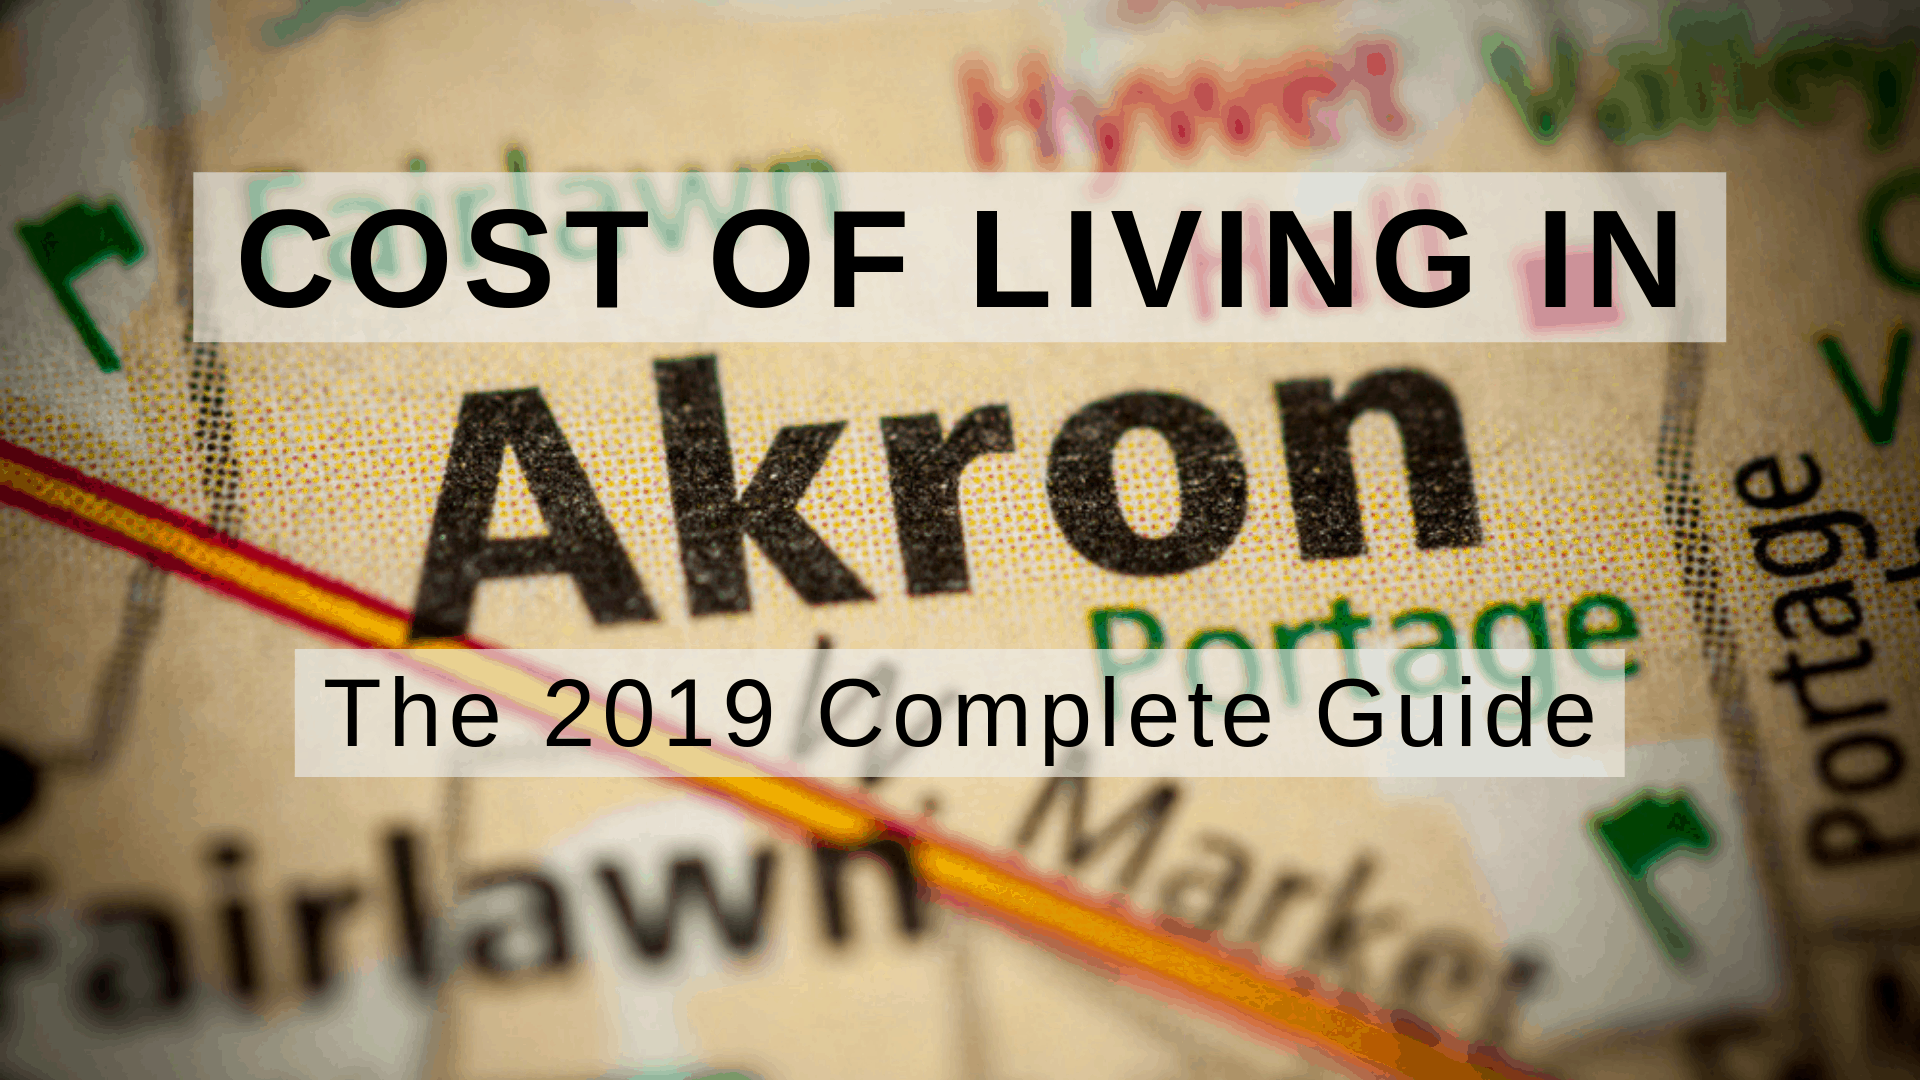 Cost of living in Akron